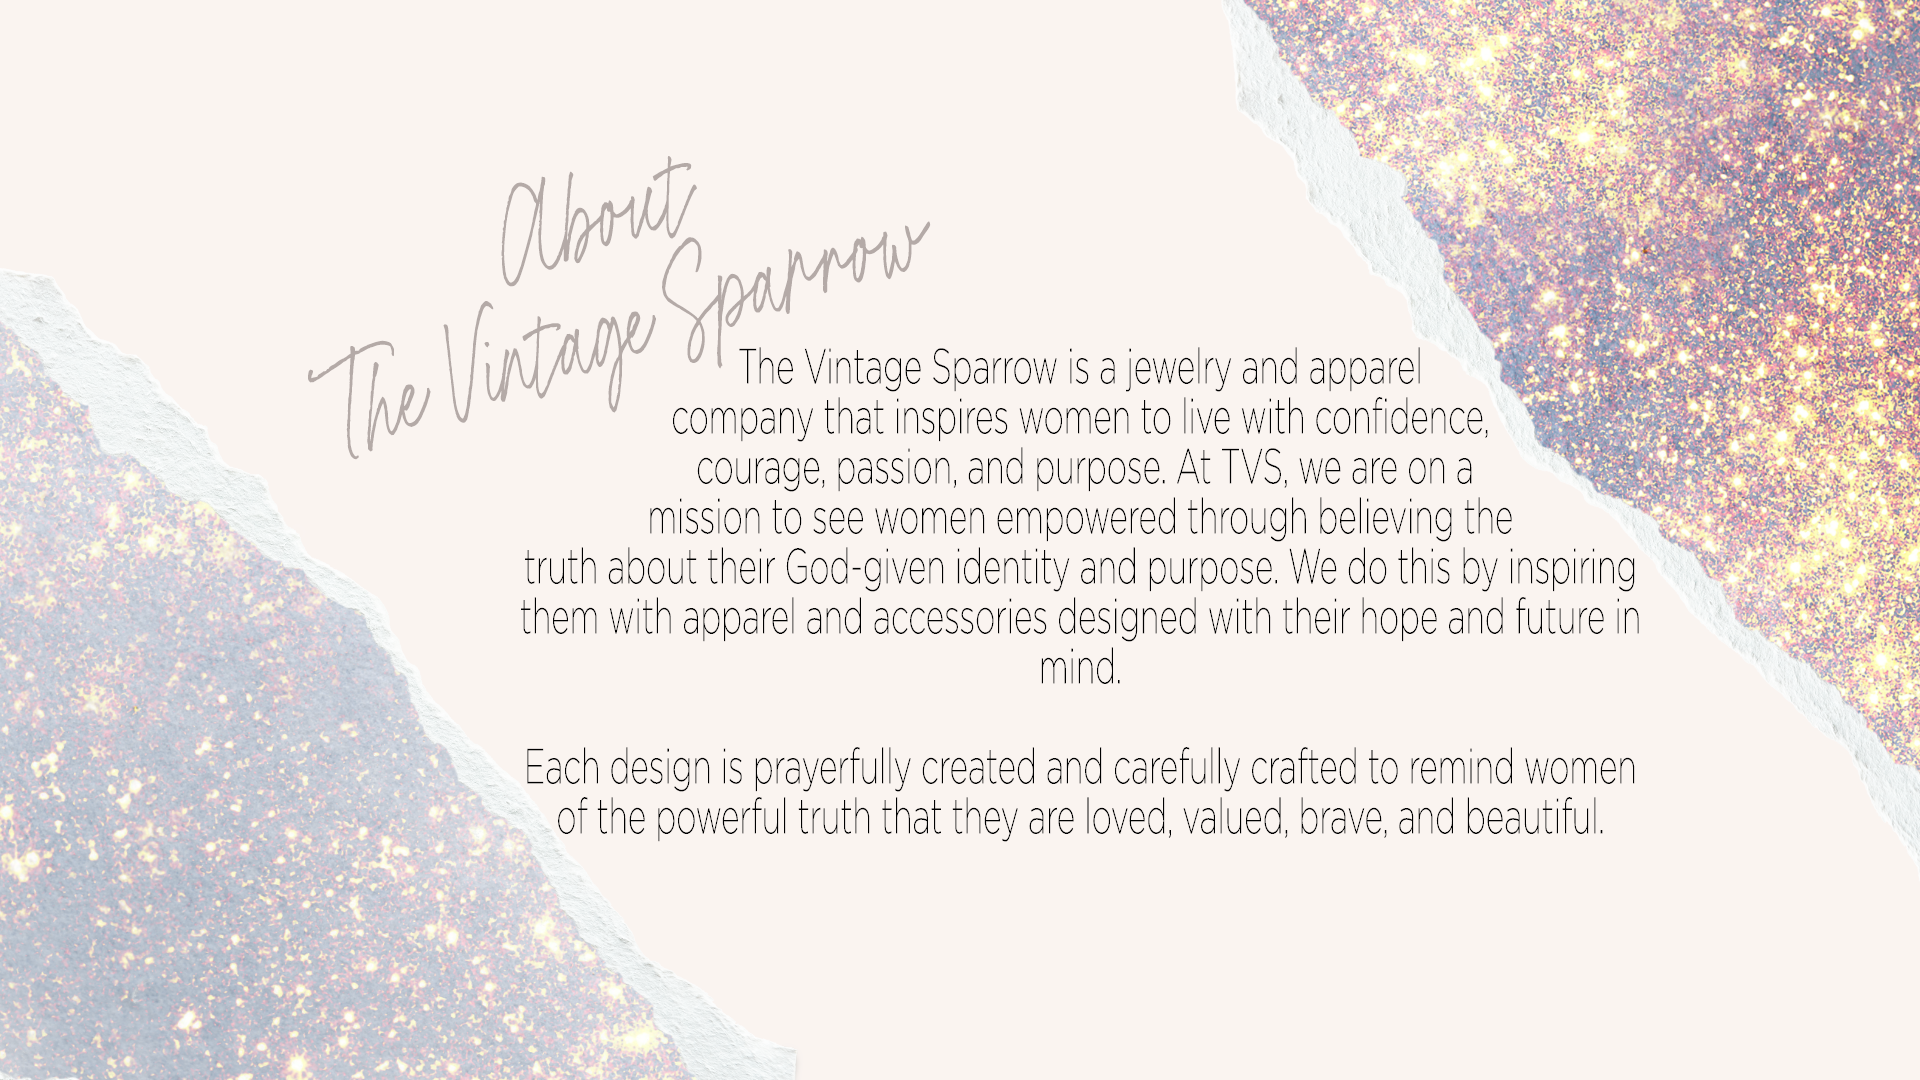 About The Vintage Sparrow